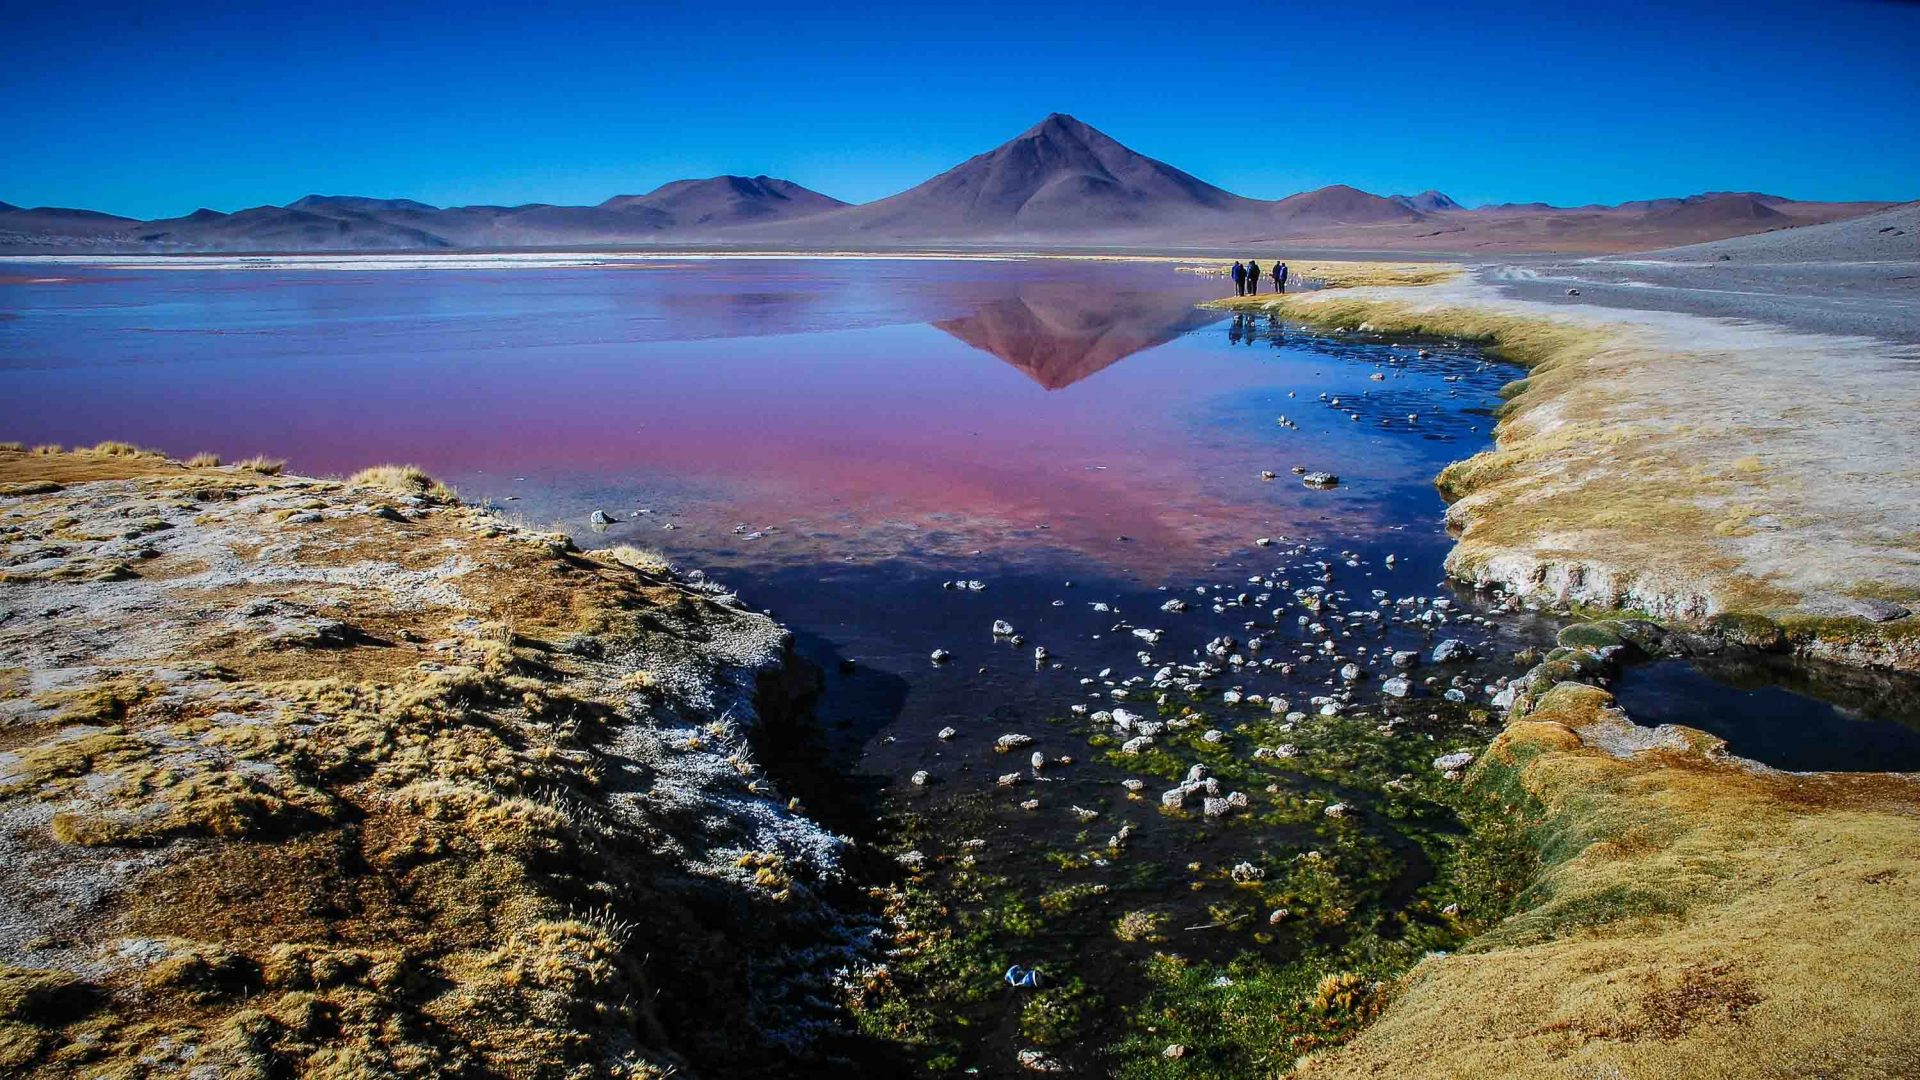 A lake made pink by algae with a mountain in the background.